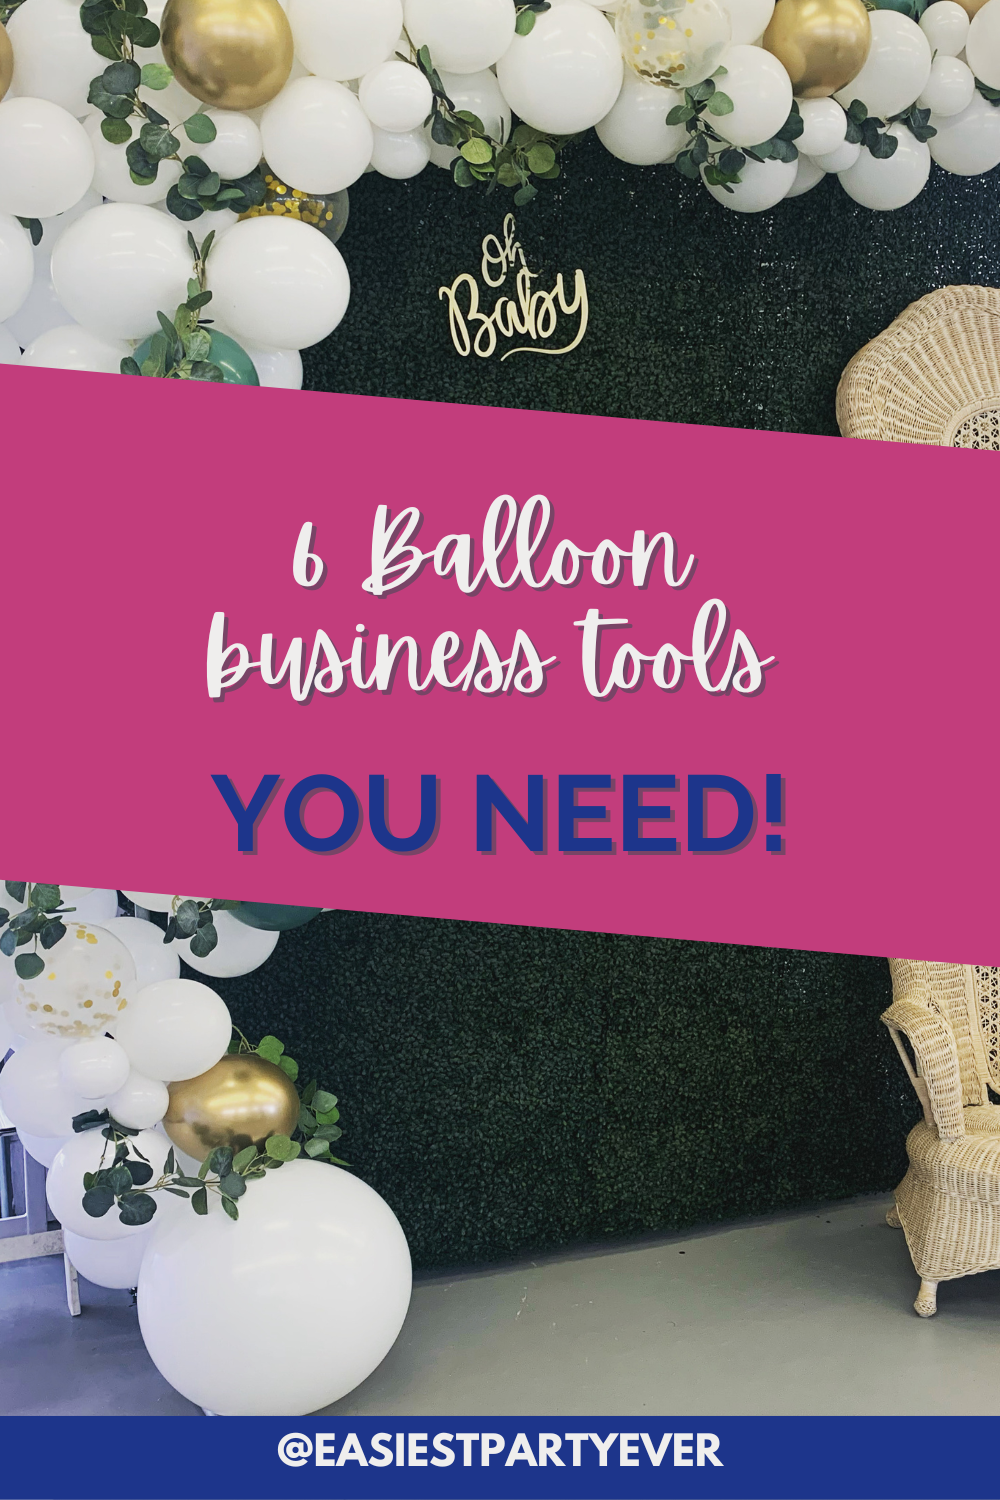 The 6 balloon business tools you need